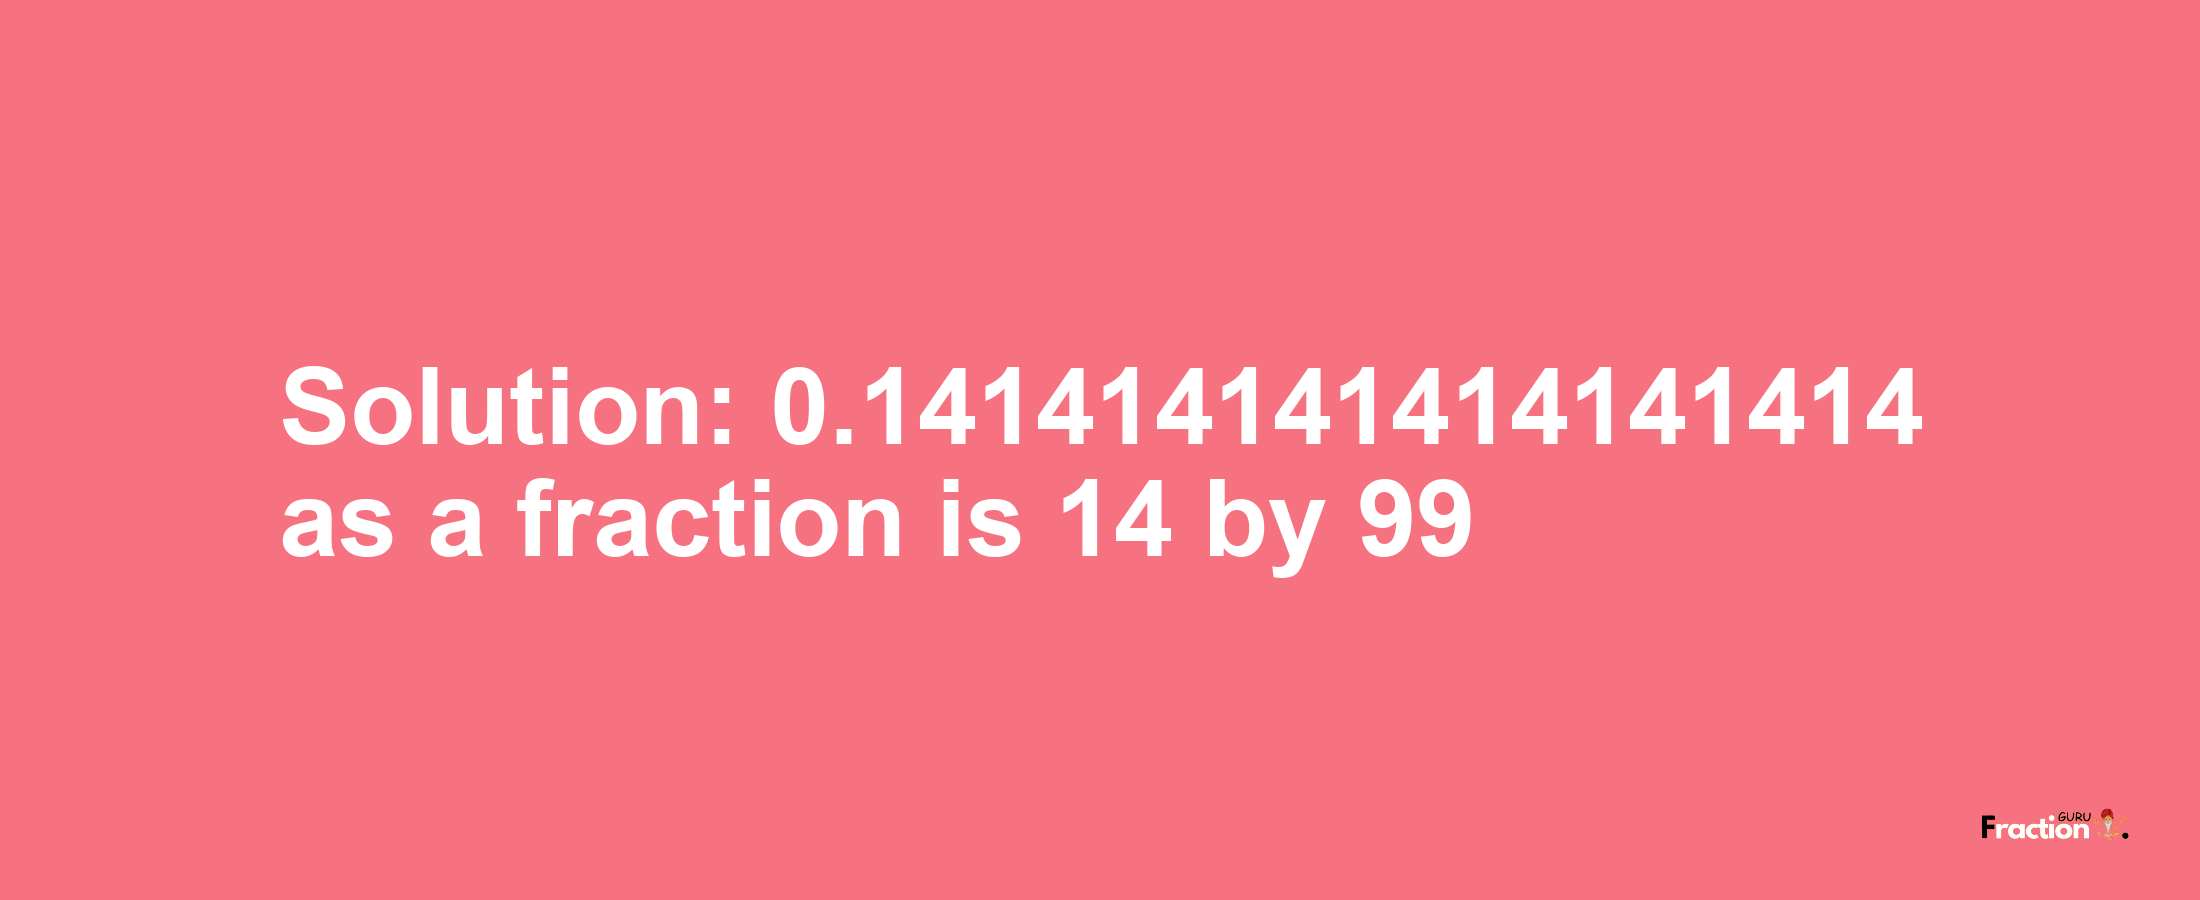 Solution:0.141414141414141414 as a fraction is 14/99